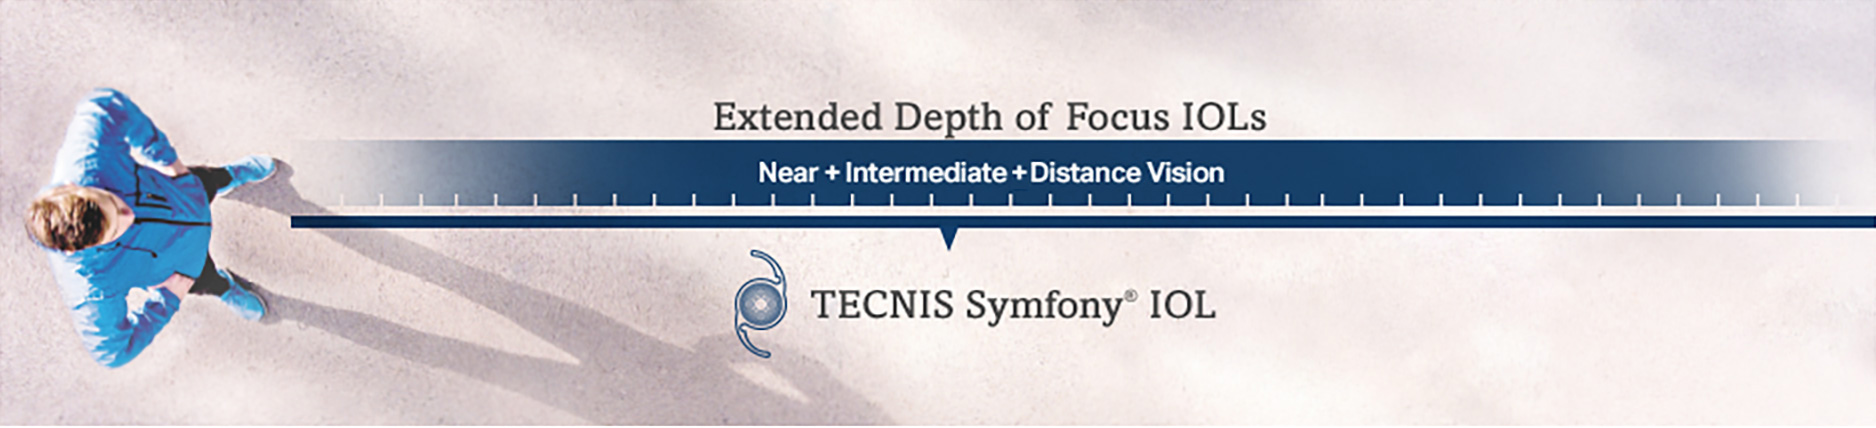 Man showing extended depth of focus for near, intermediate, and distance vision with TECNIS® Symfony® IOL